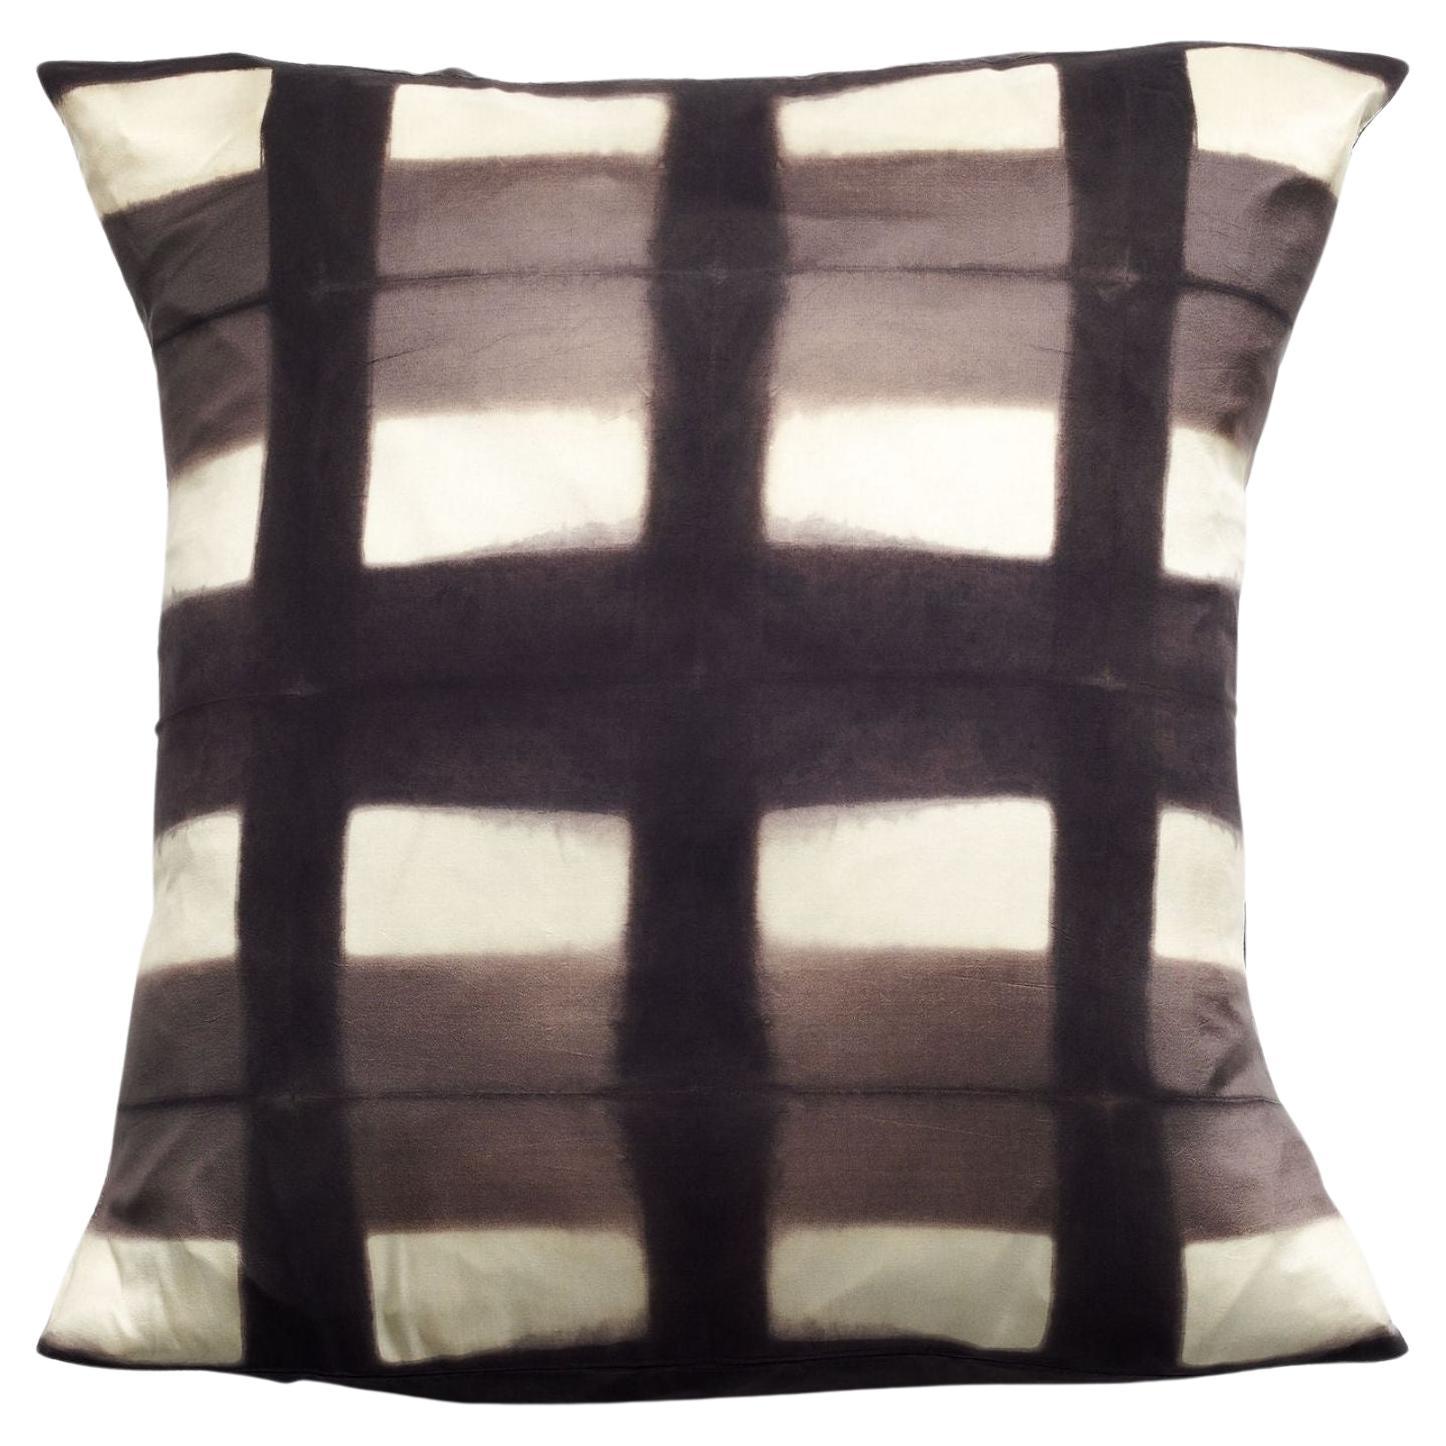 Melo Black Silk Pillow In Geometric Pattern, Handcrafted By Artisans  For Sale